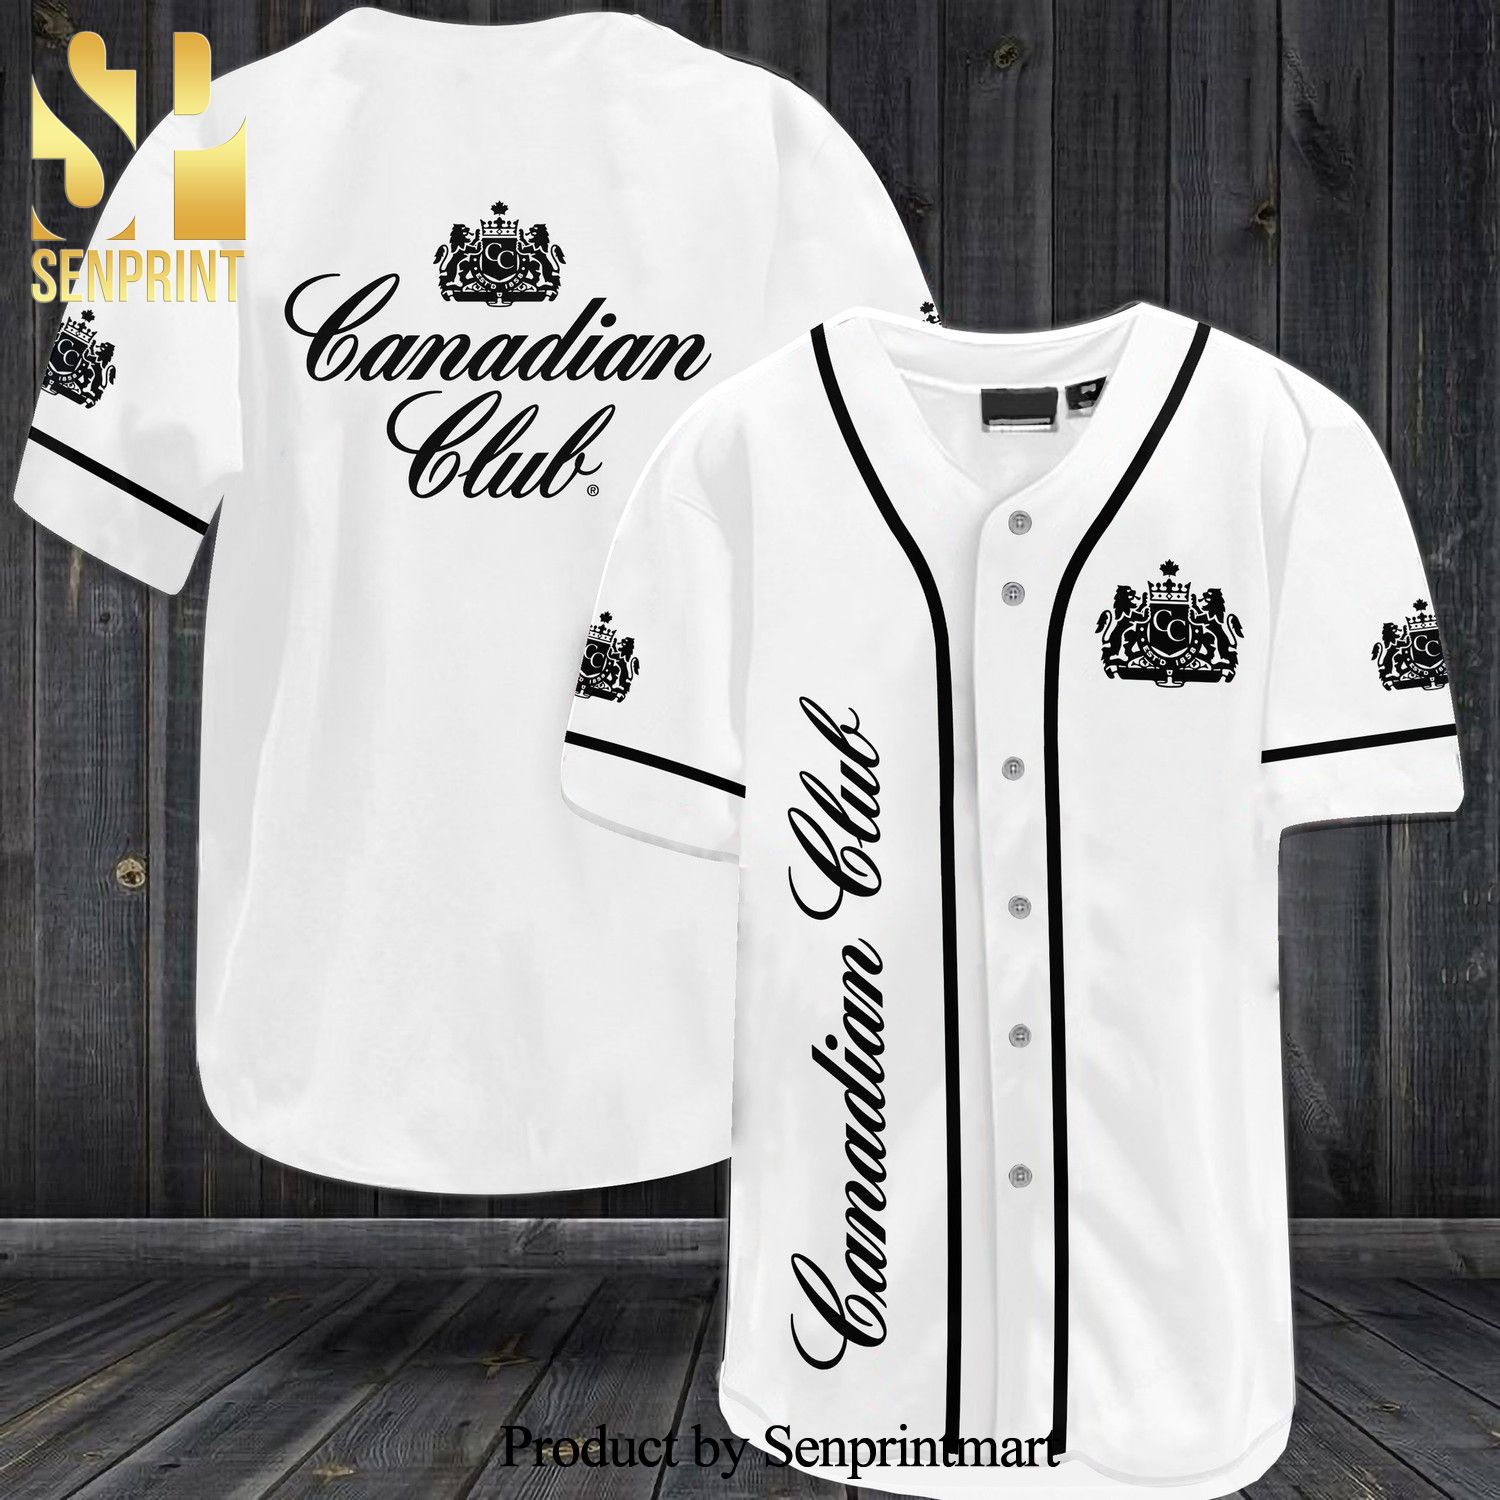 Canadian Club All Over Print Baseball Jersey – White